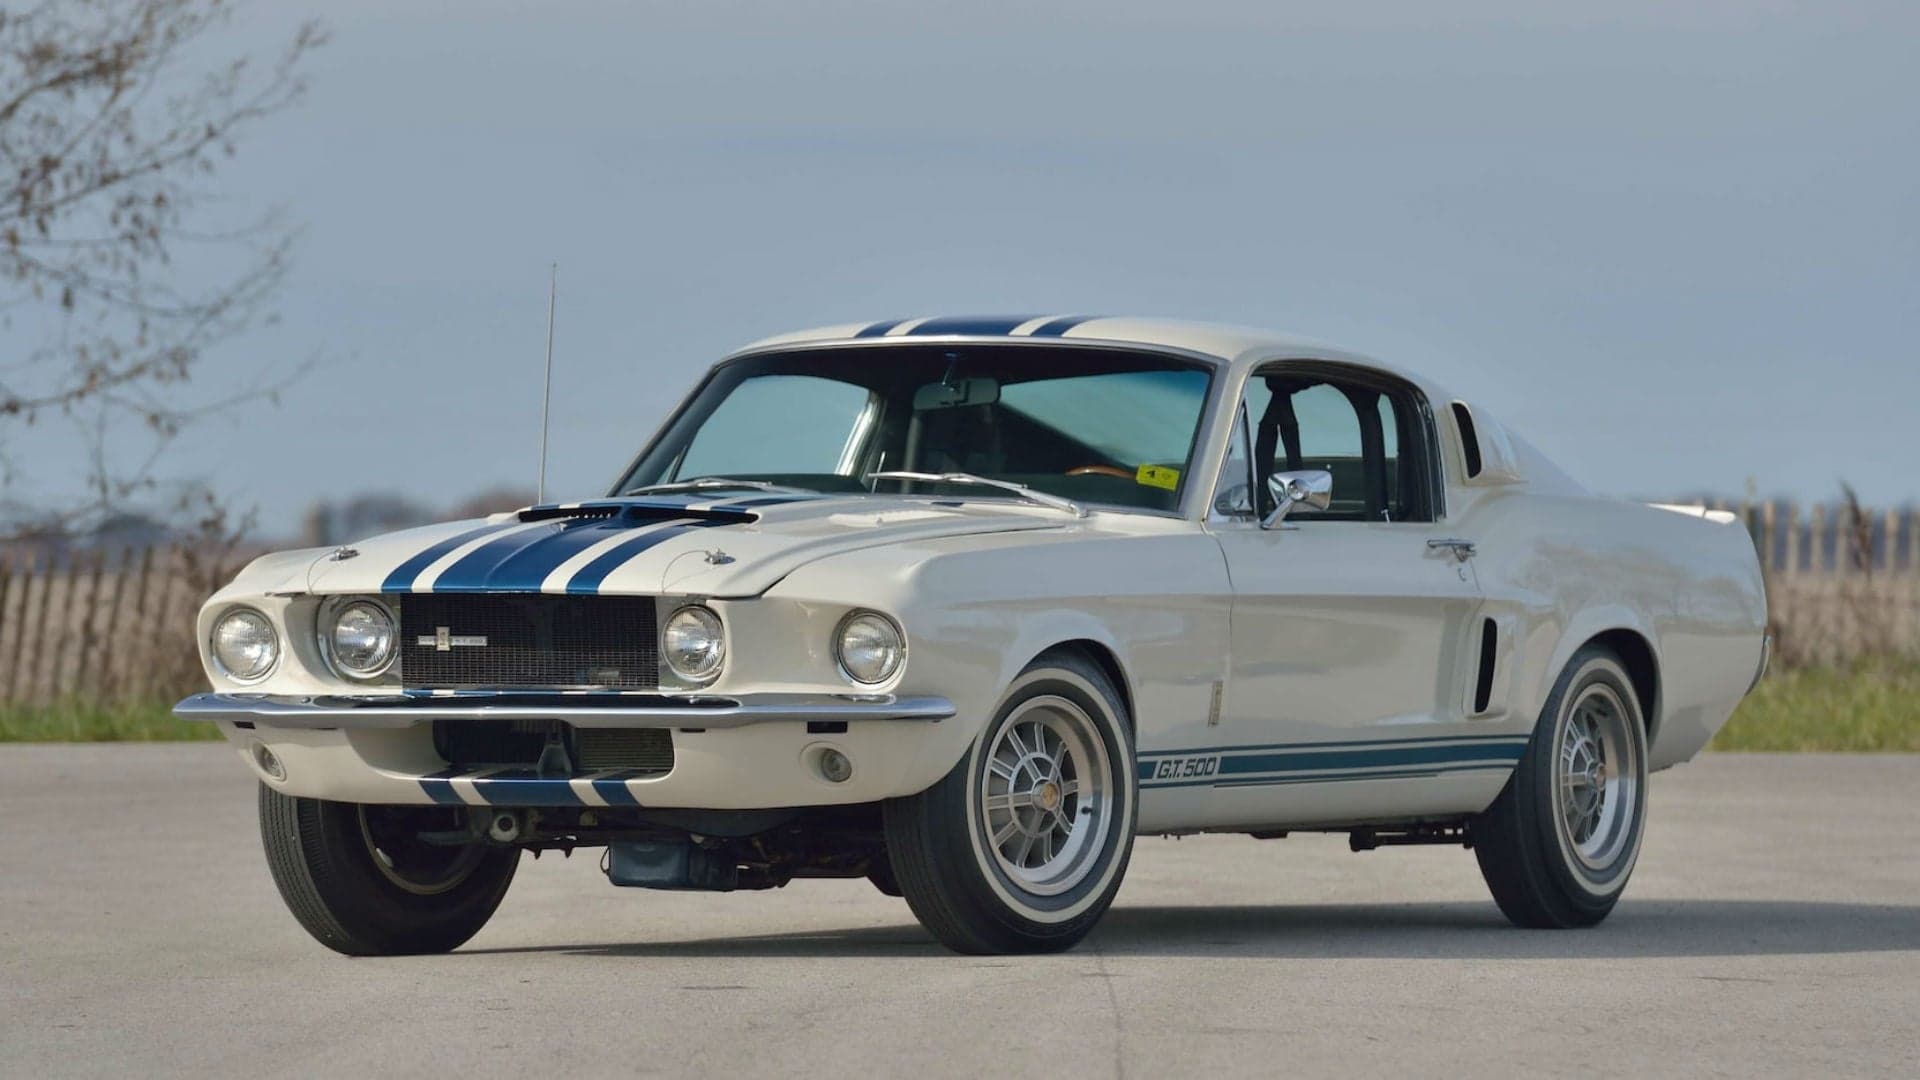 One-Off 1967 Shelby GT500 Super Snake Expected to Fetch $1 Million at Auction